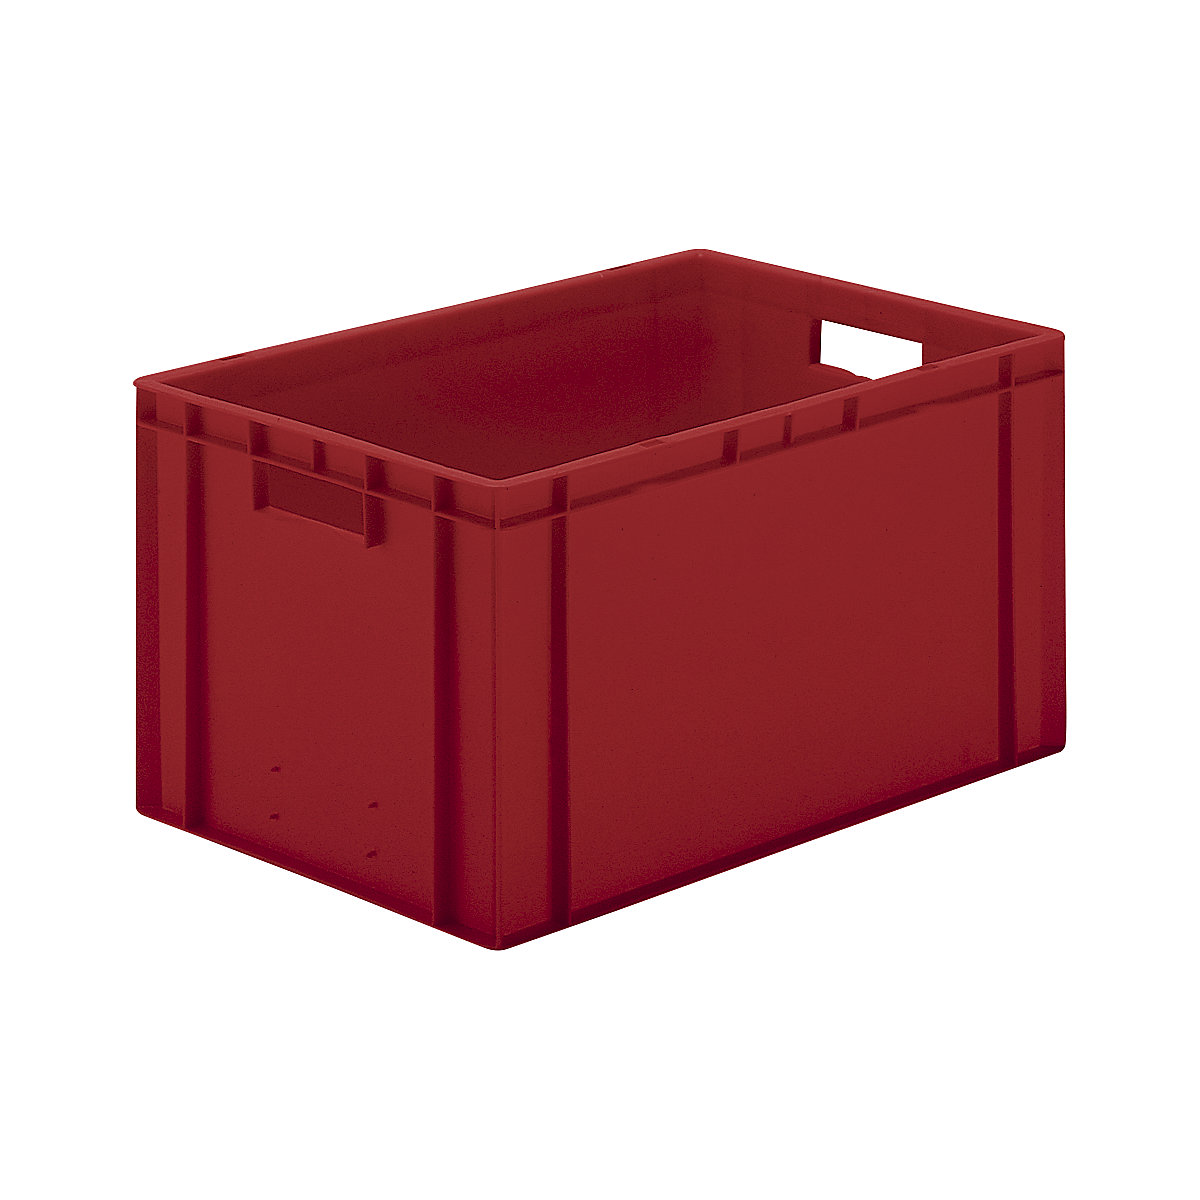 Euro stacking container, closed walls and base, LxWxH 600 x 400 x 320 mm, red, pack of 5